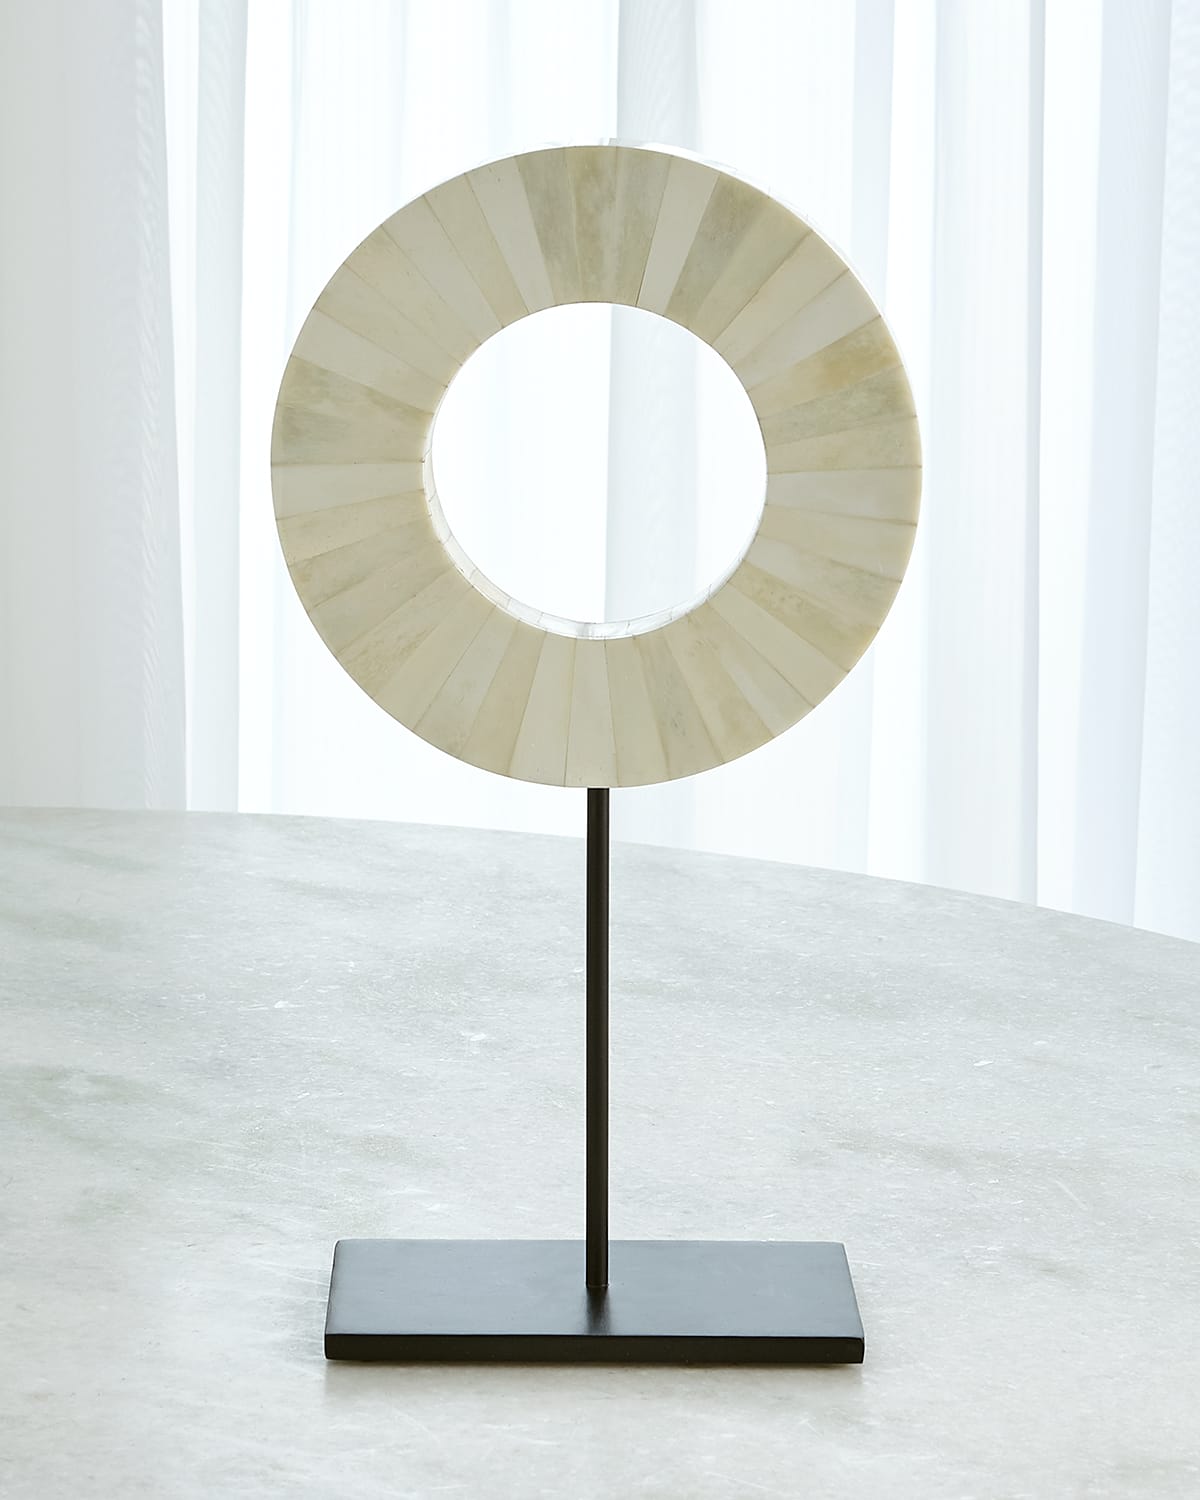 William D Scott Small One Layer Mounted Ring Sculpture